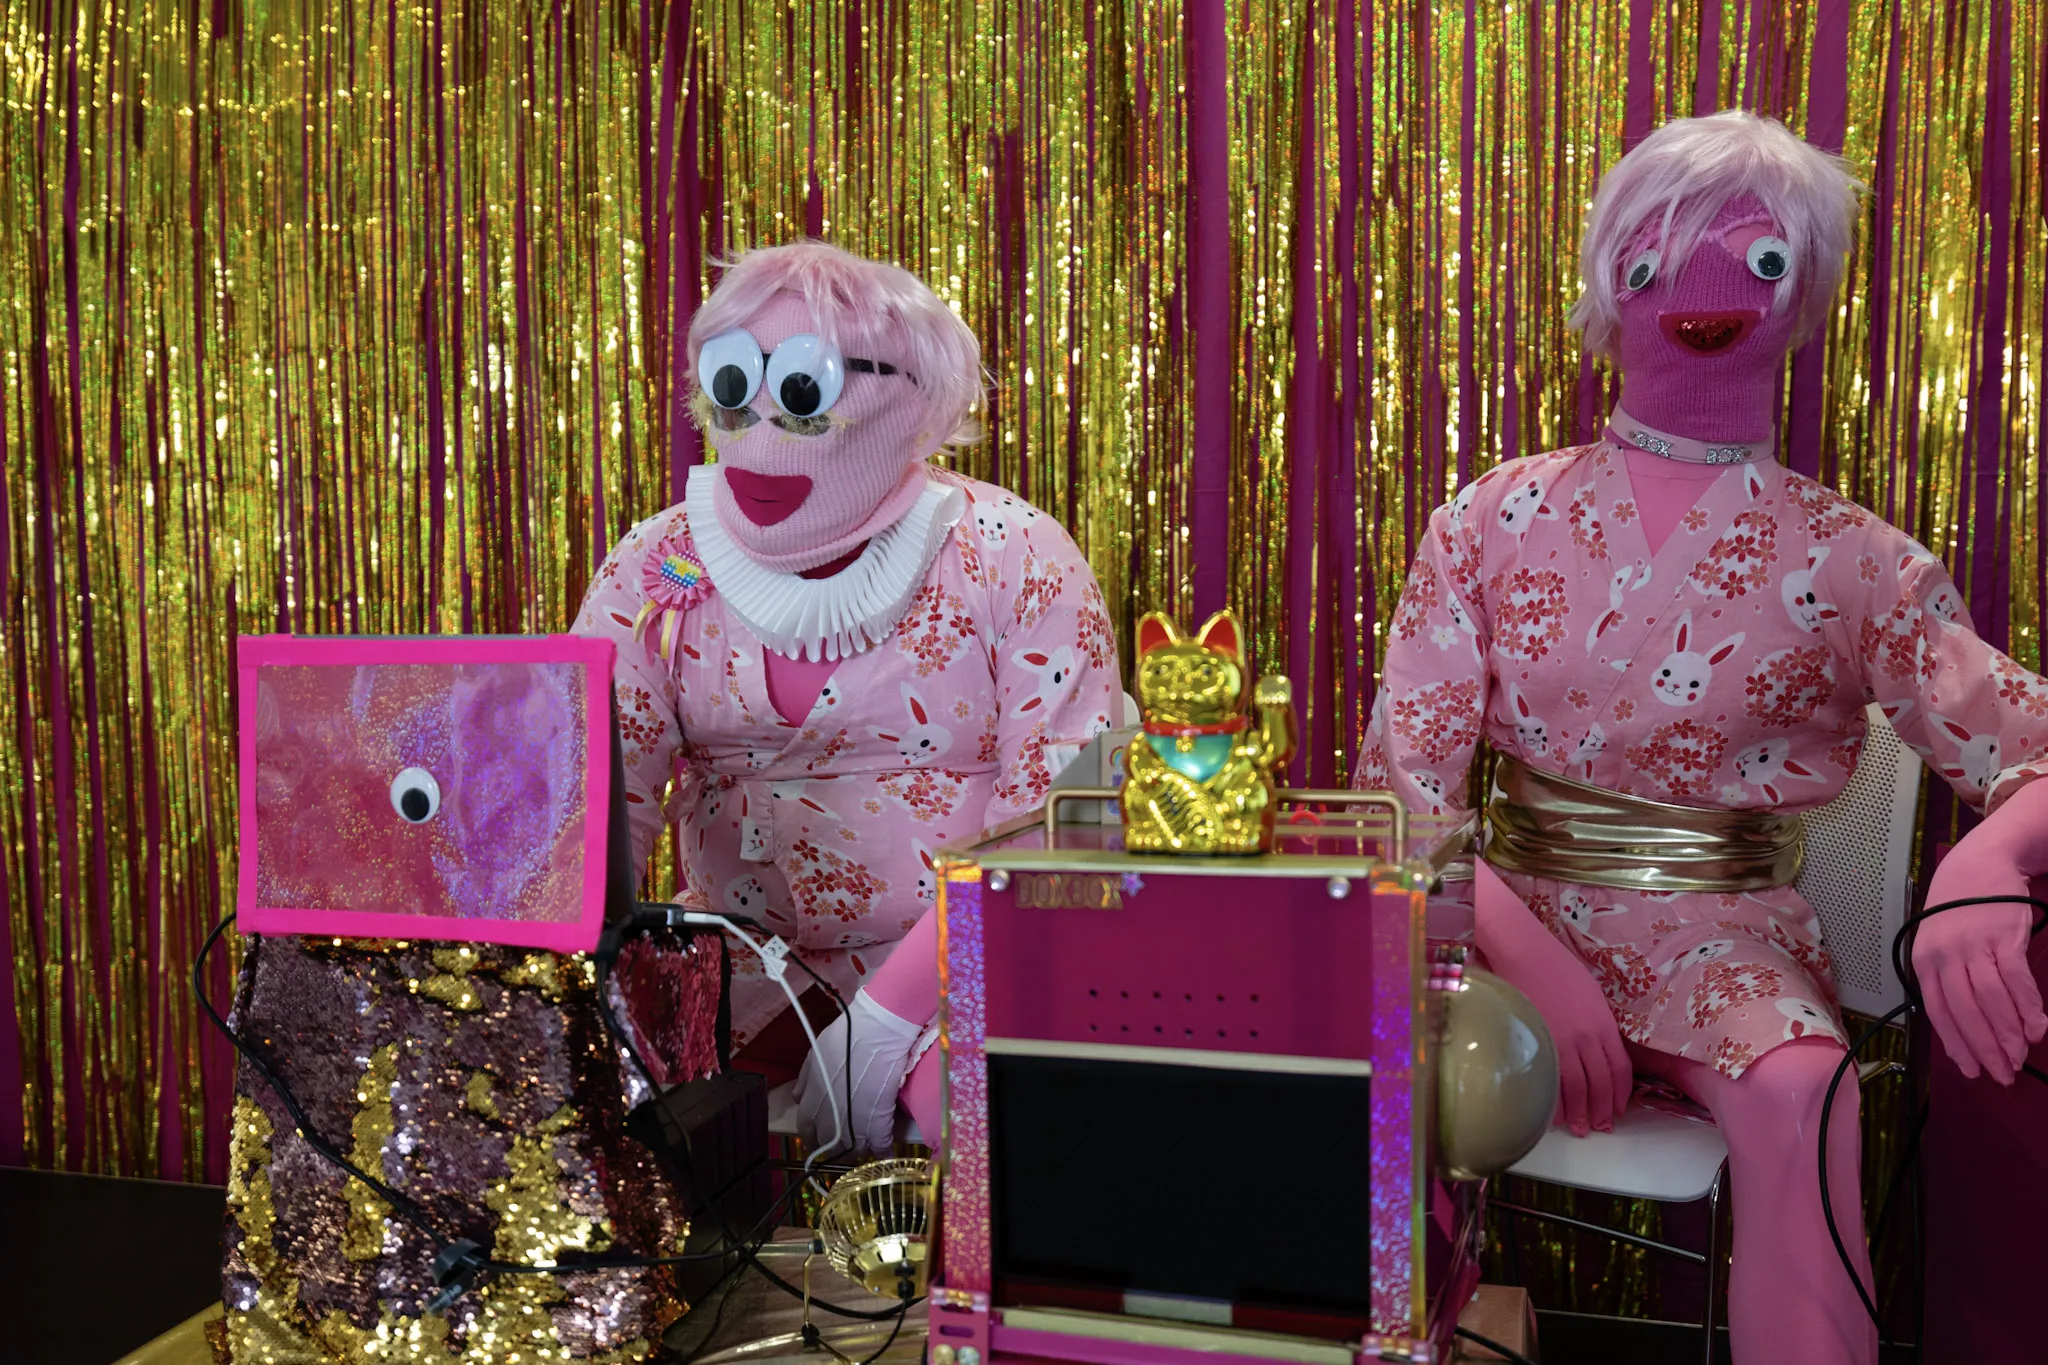 A picture of a performance of the Open Data Institute's 'DoxBox trustbot', with a mannekin and man in matching pink costumes sat around bright pink and gold furniture and backdrop. 